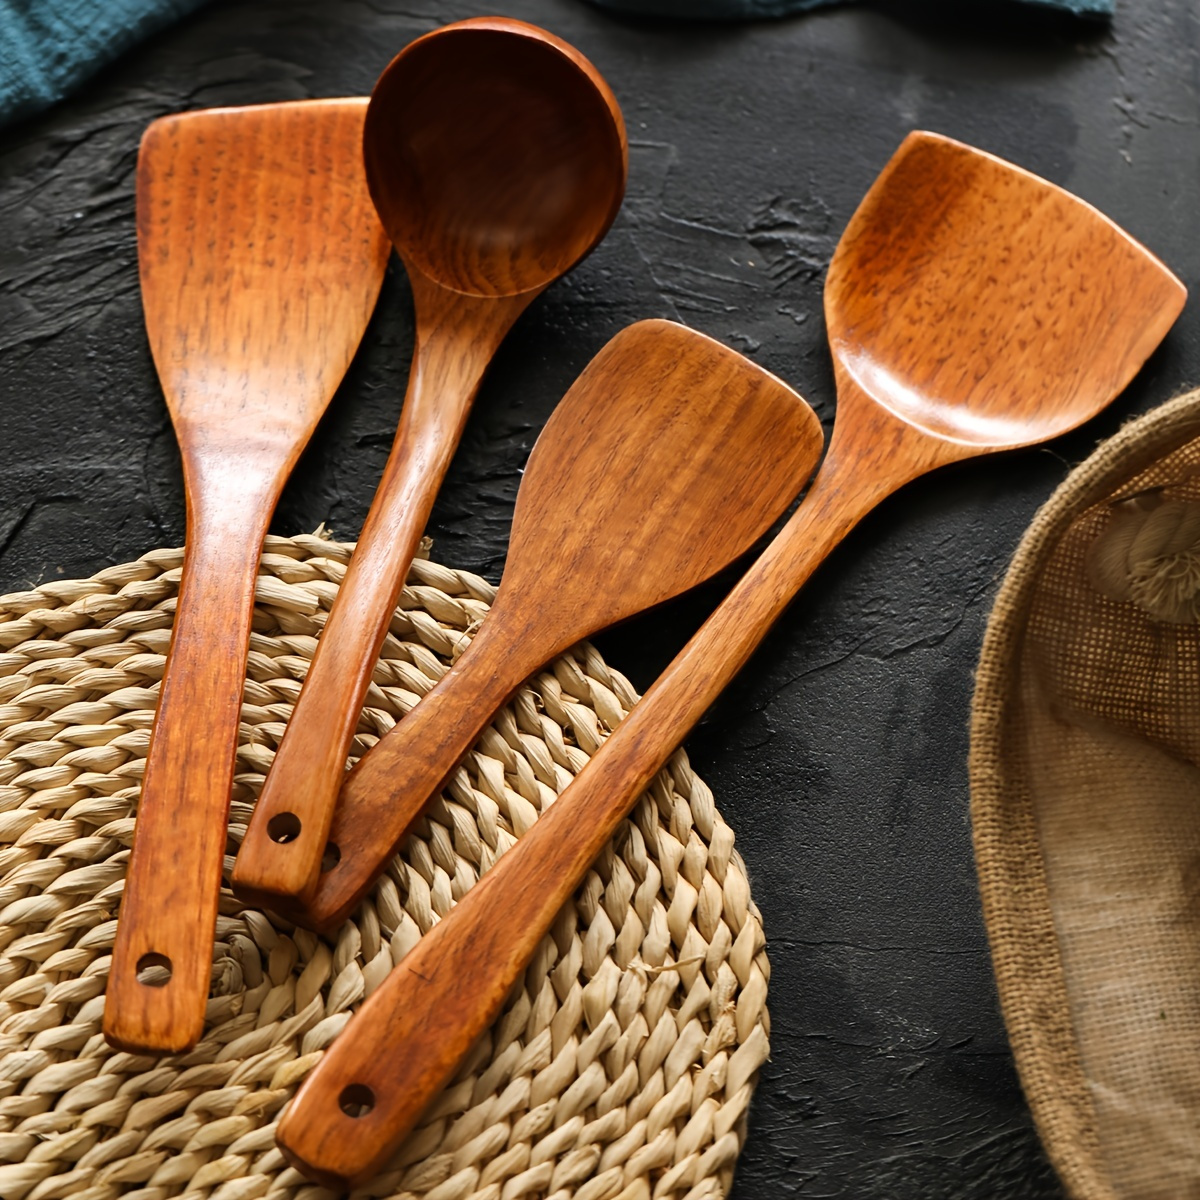 4 Pieces 10.2 Inch Wood Salad Spoons Salad Servers Wooden Serving Spoons  and Long Wood Serving Forks Non-Stick Teak Wooden Salad Server Tools for